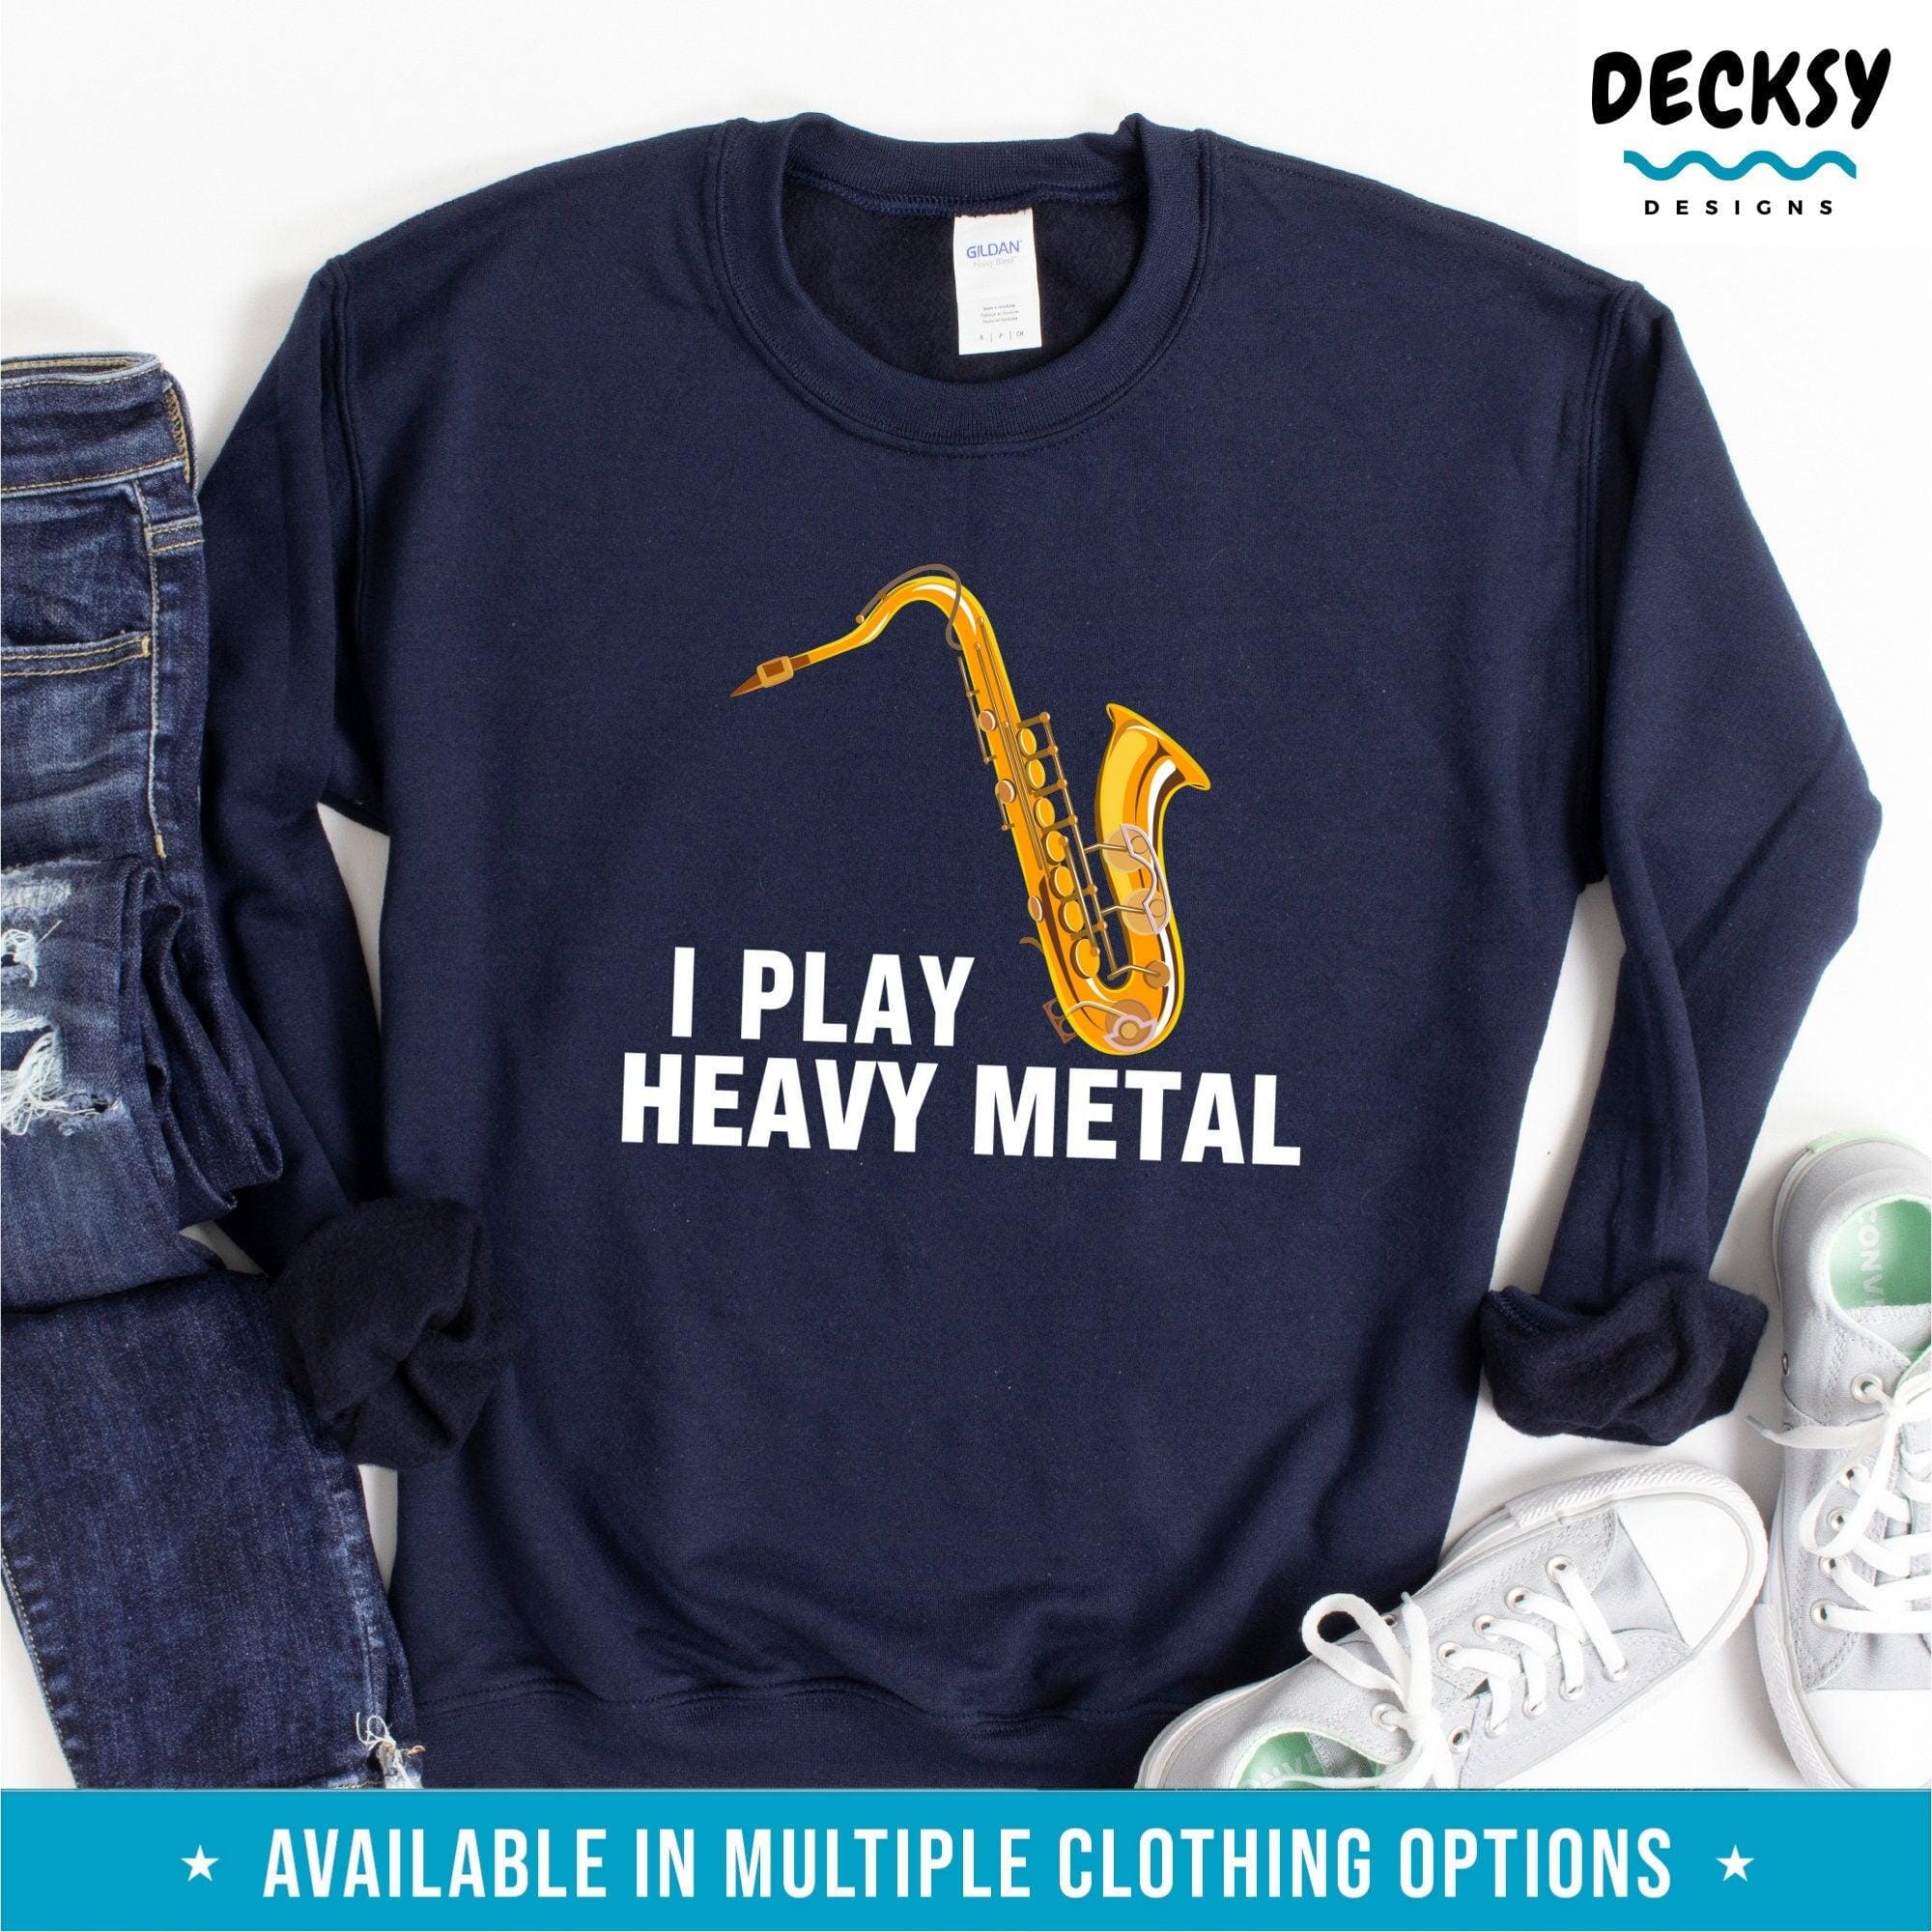 Saxophone Shirt, Sax Musician Gift, Jazz Musician Tee-Clothing:Gender-Neutral Adult Clothing:Tops & Tees:T-shirts:Graphic Tees-DecksyDesigns